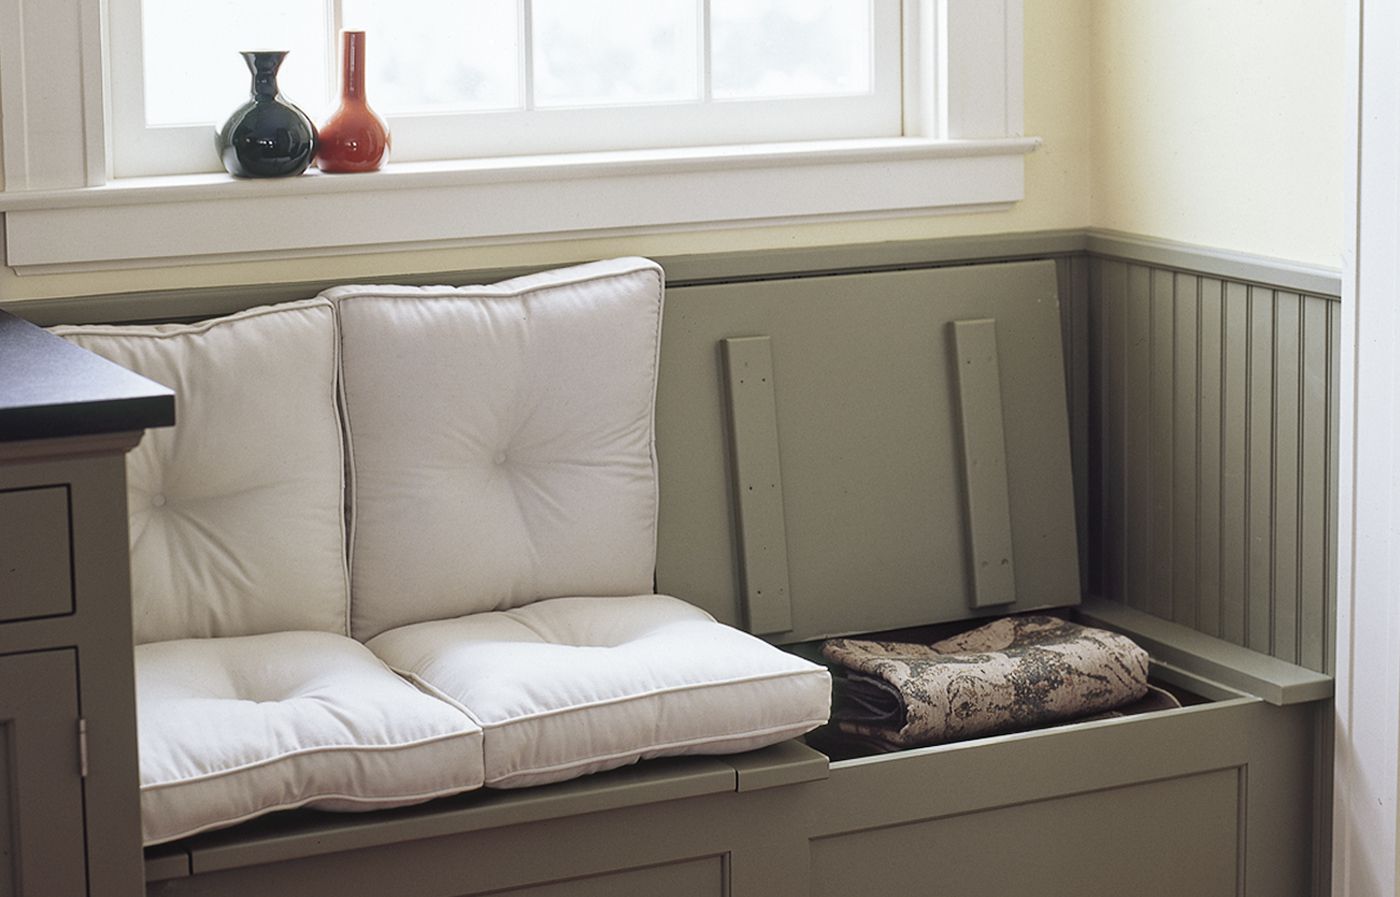 How To Make A Window Seat With Storage